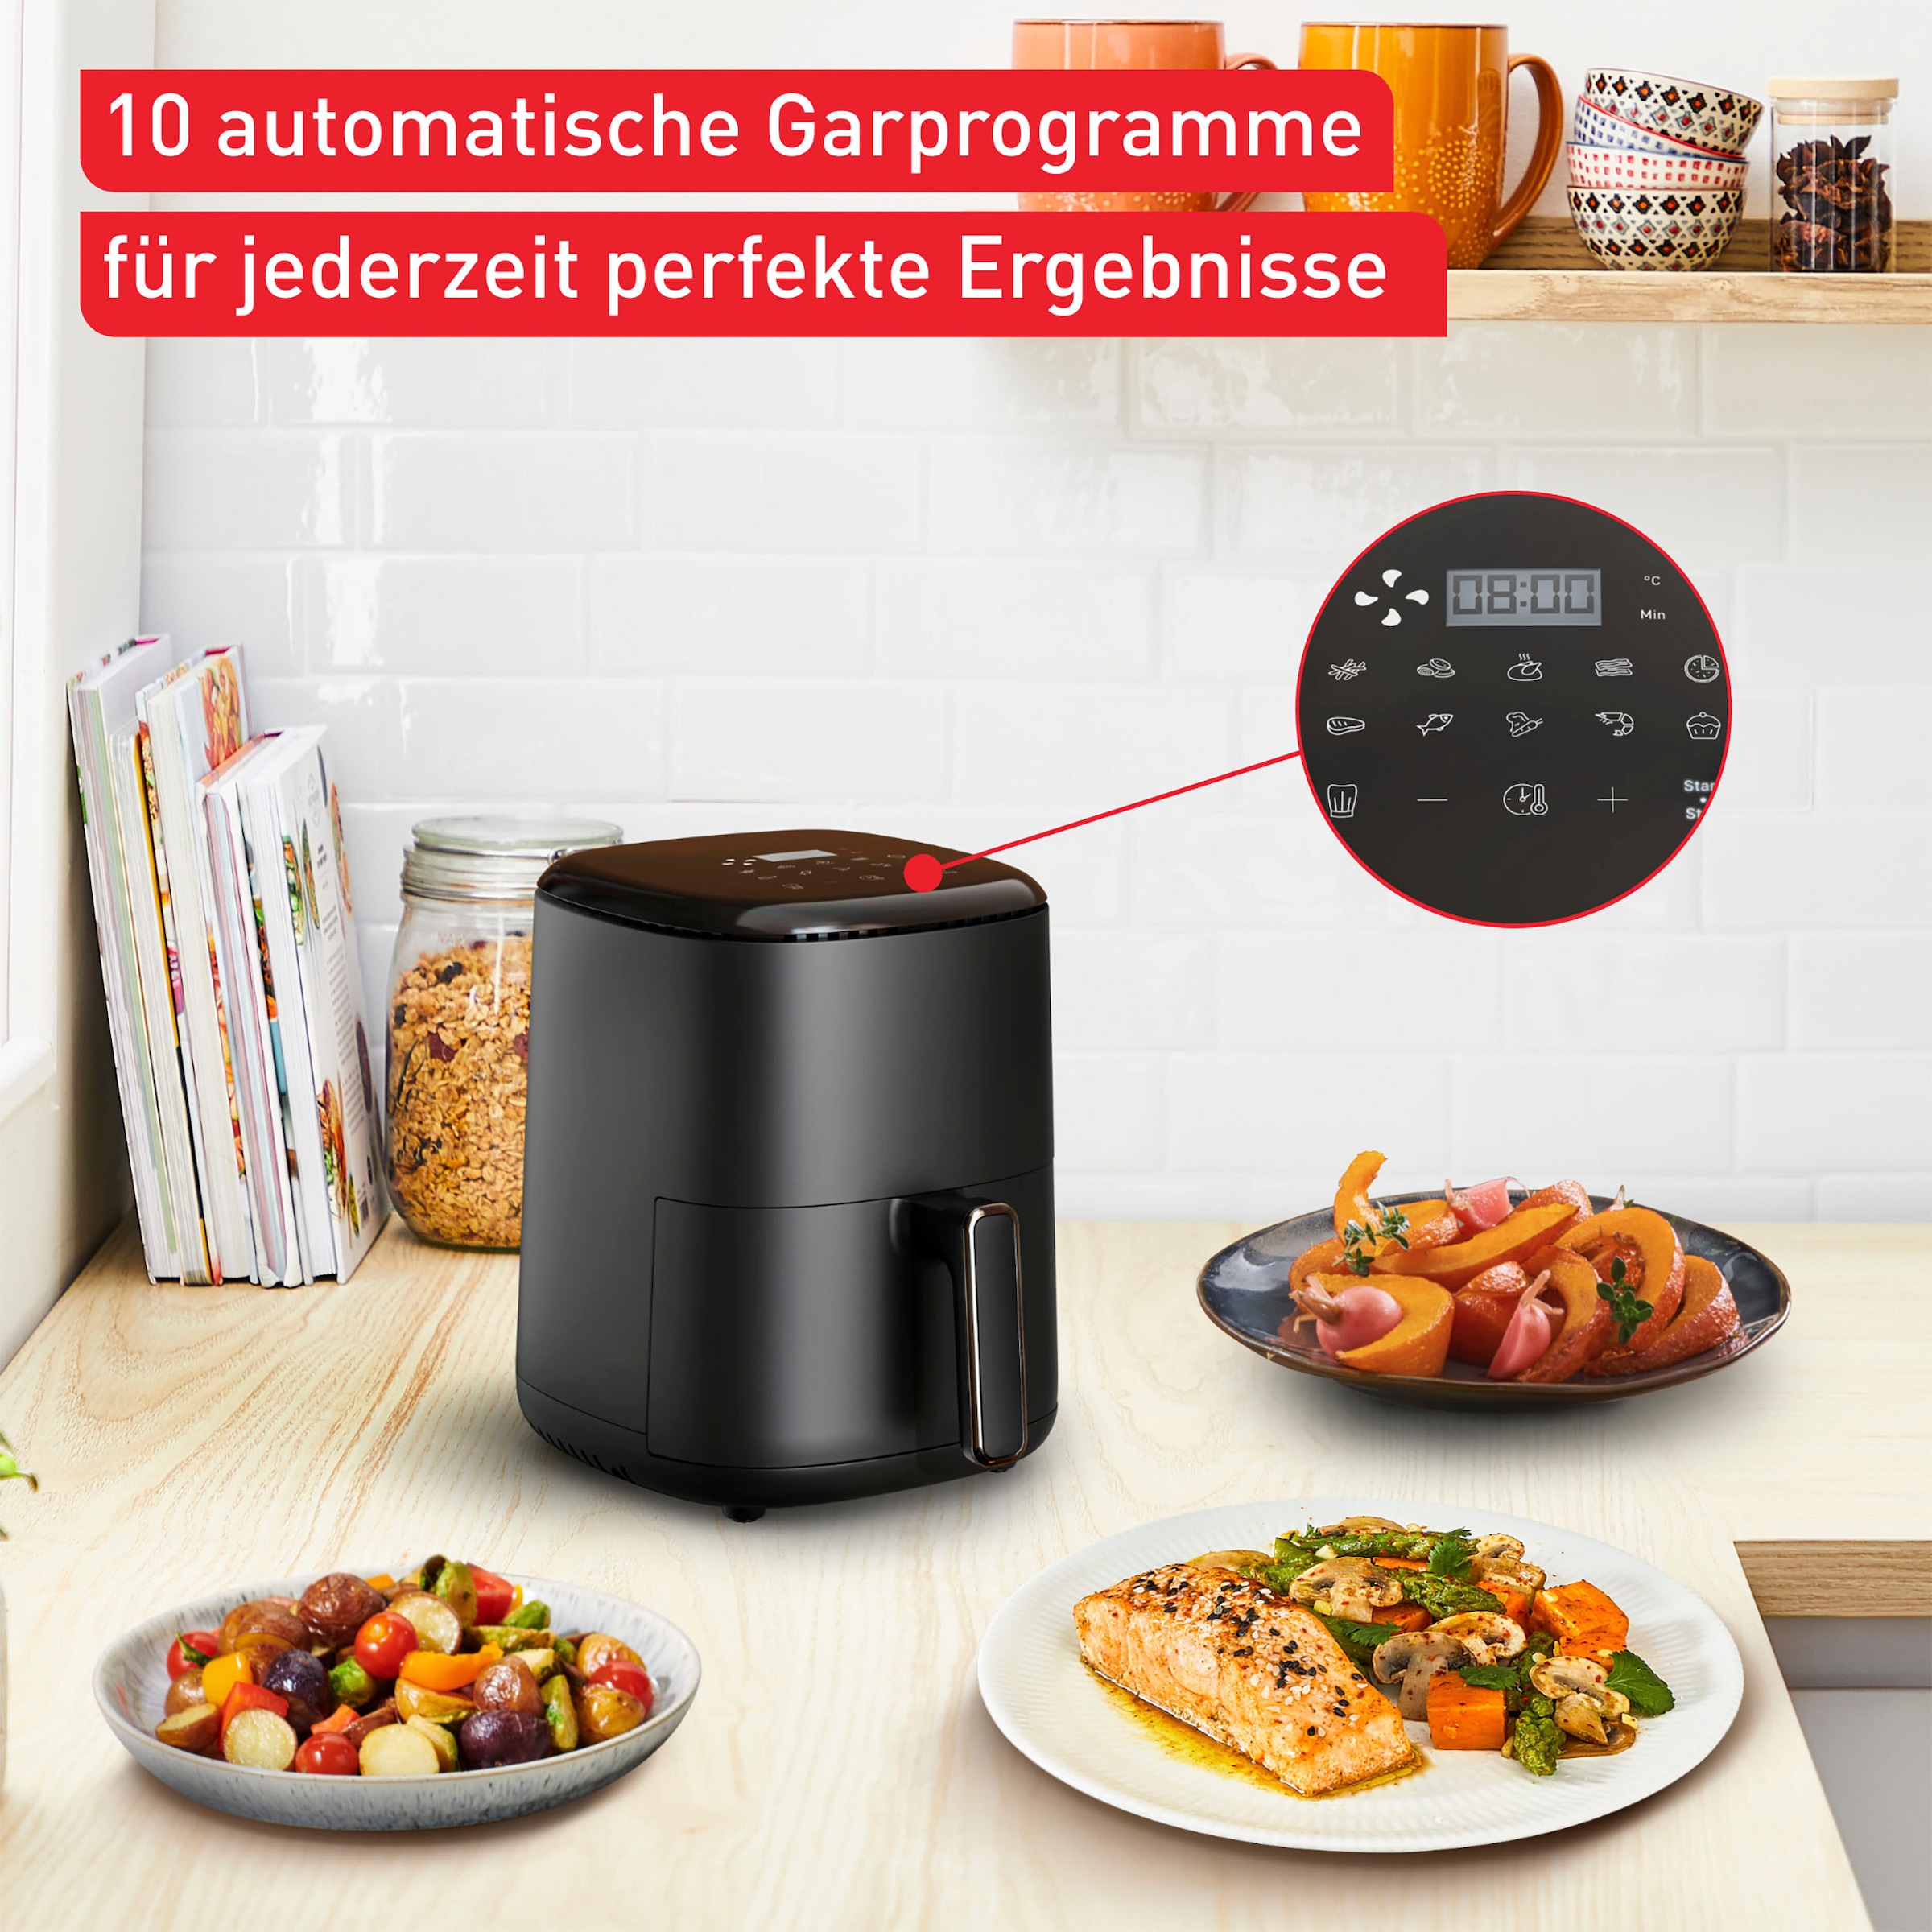 Tefal Heißluftfritteuse »EY1458 Easy Fry 1300 Shop Online im W Compact«, OTTO